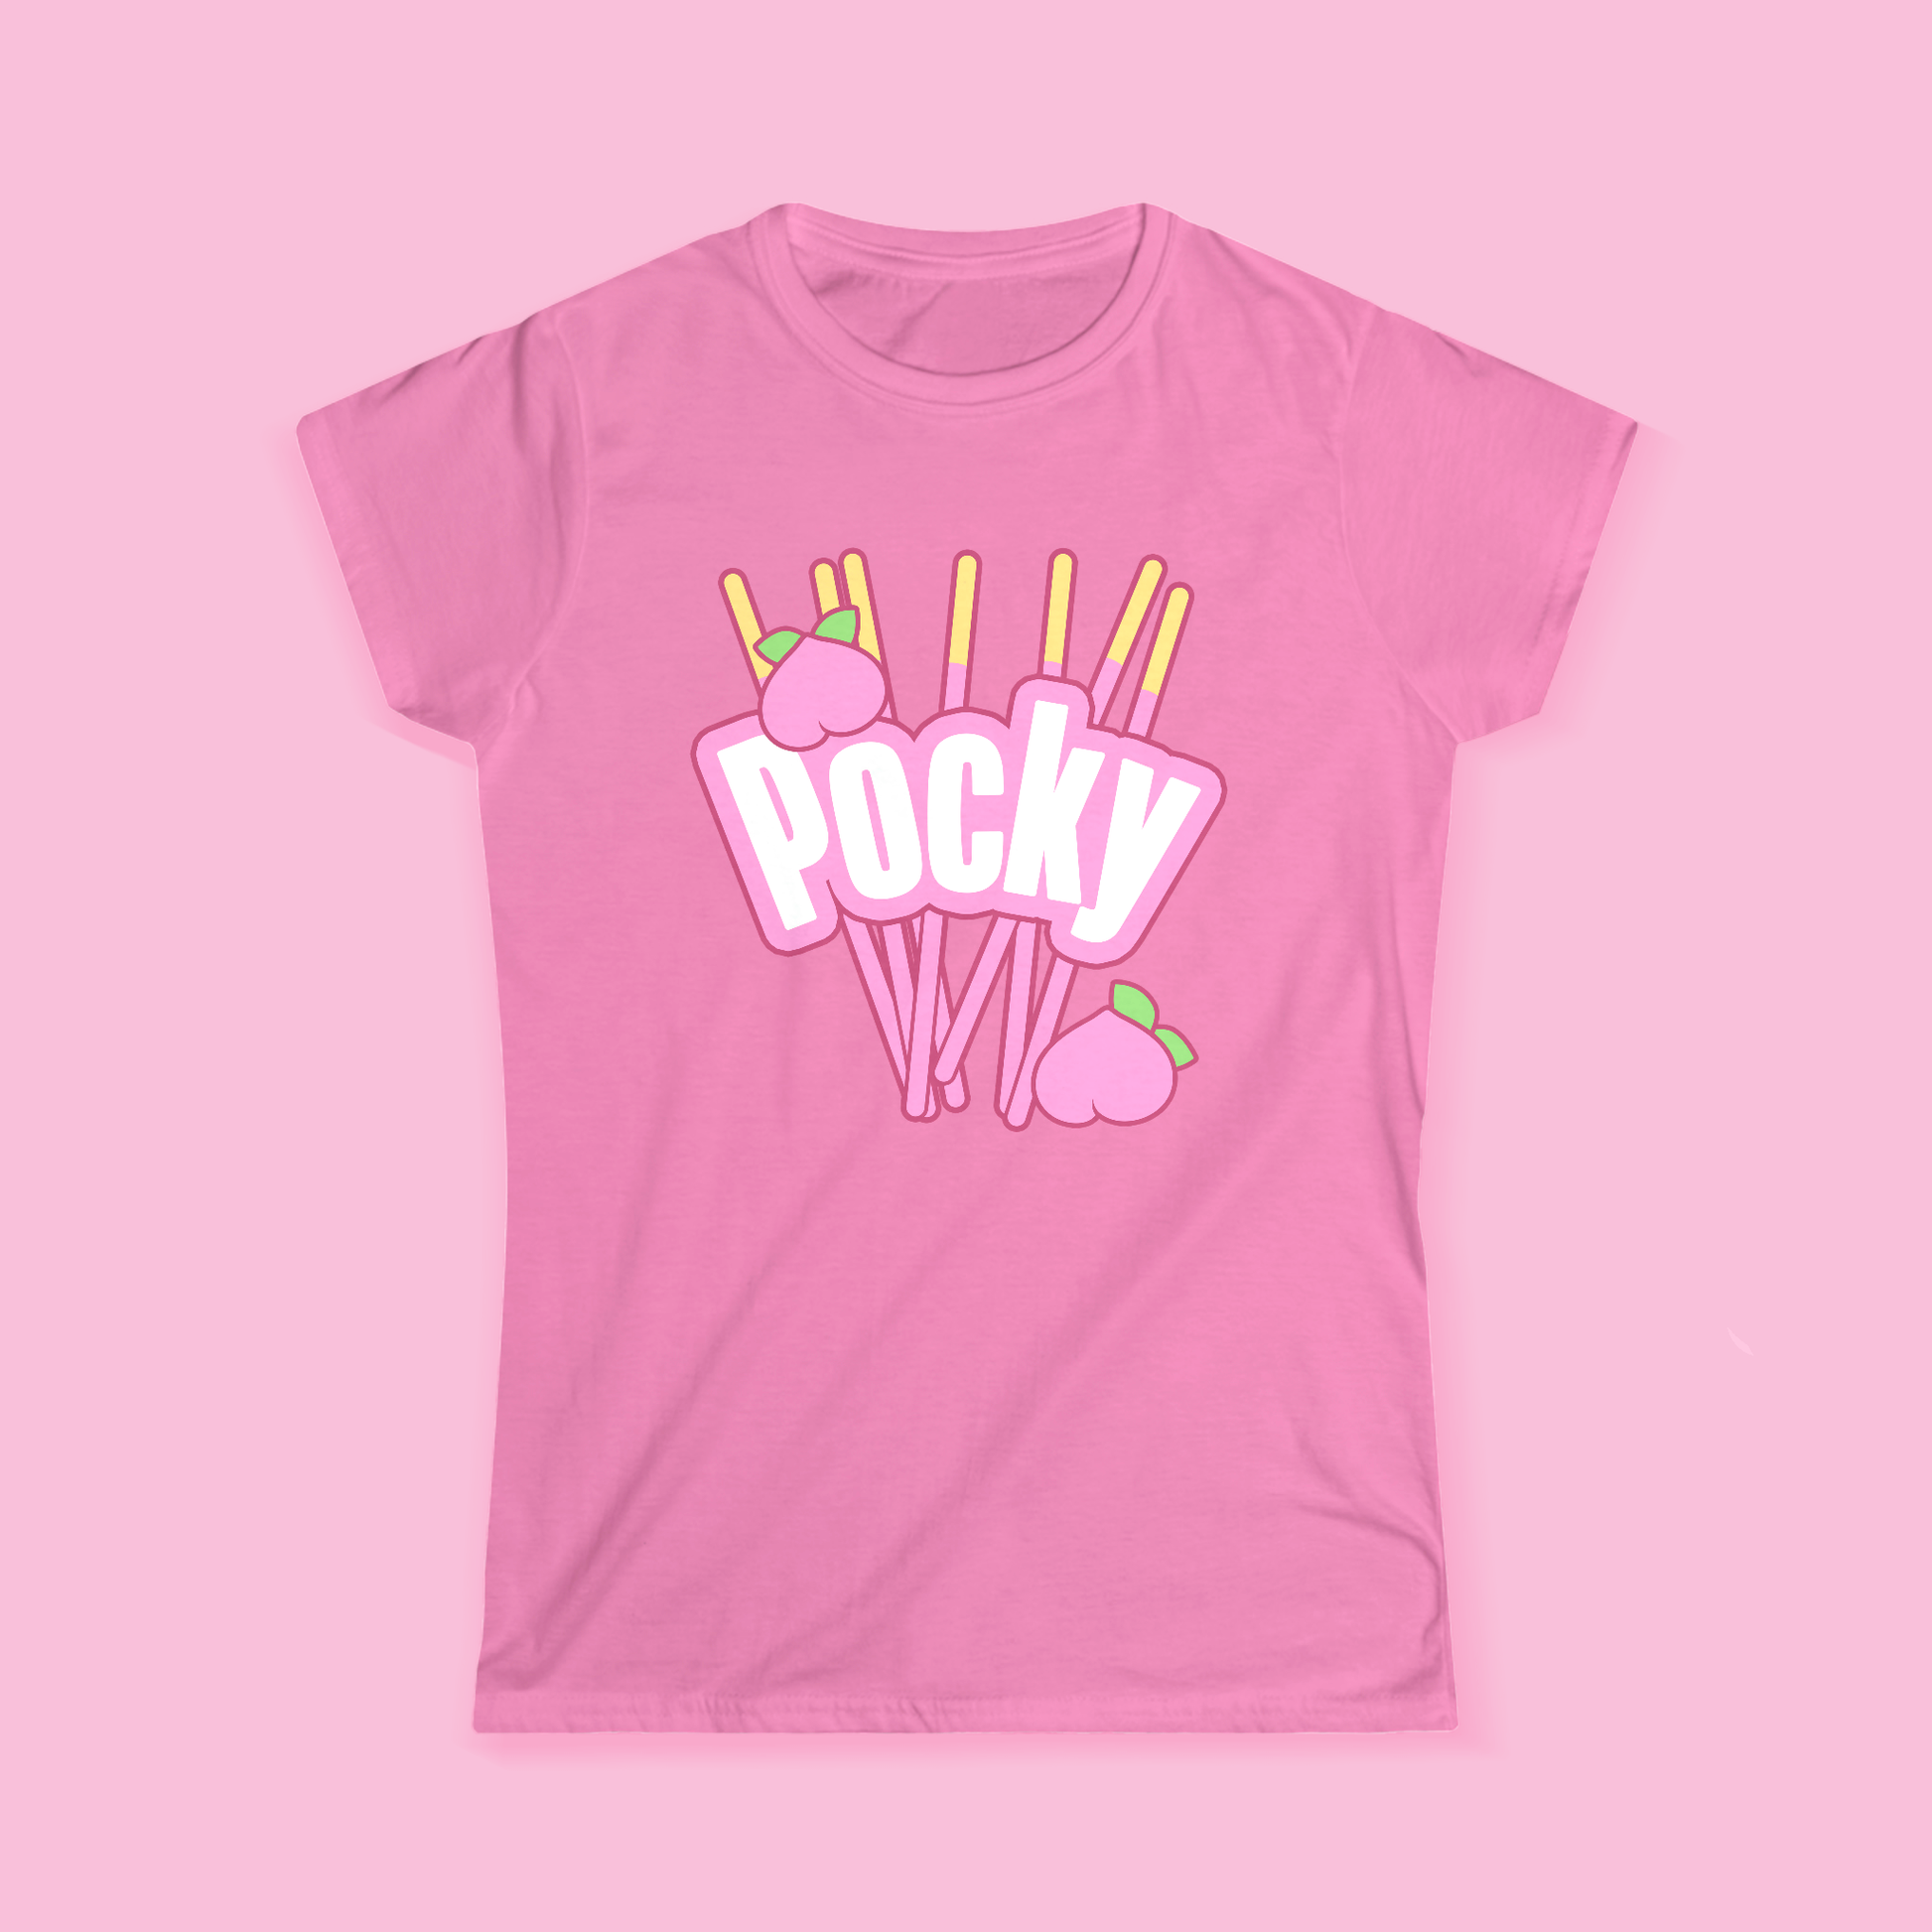 Shop for Pink, Tops & T-Shirts, Fashion